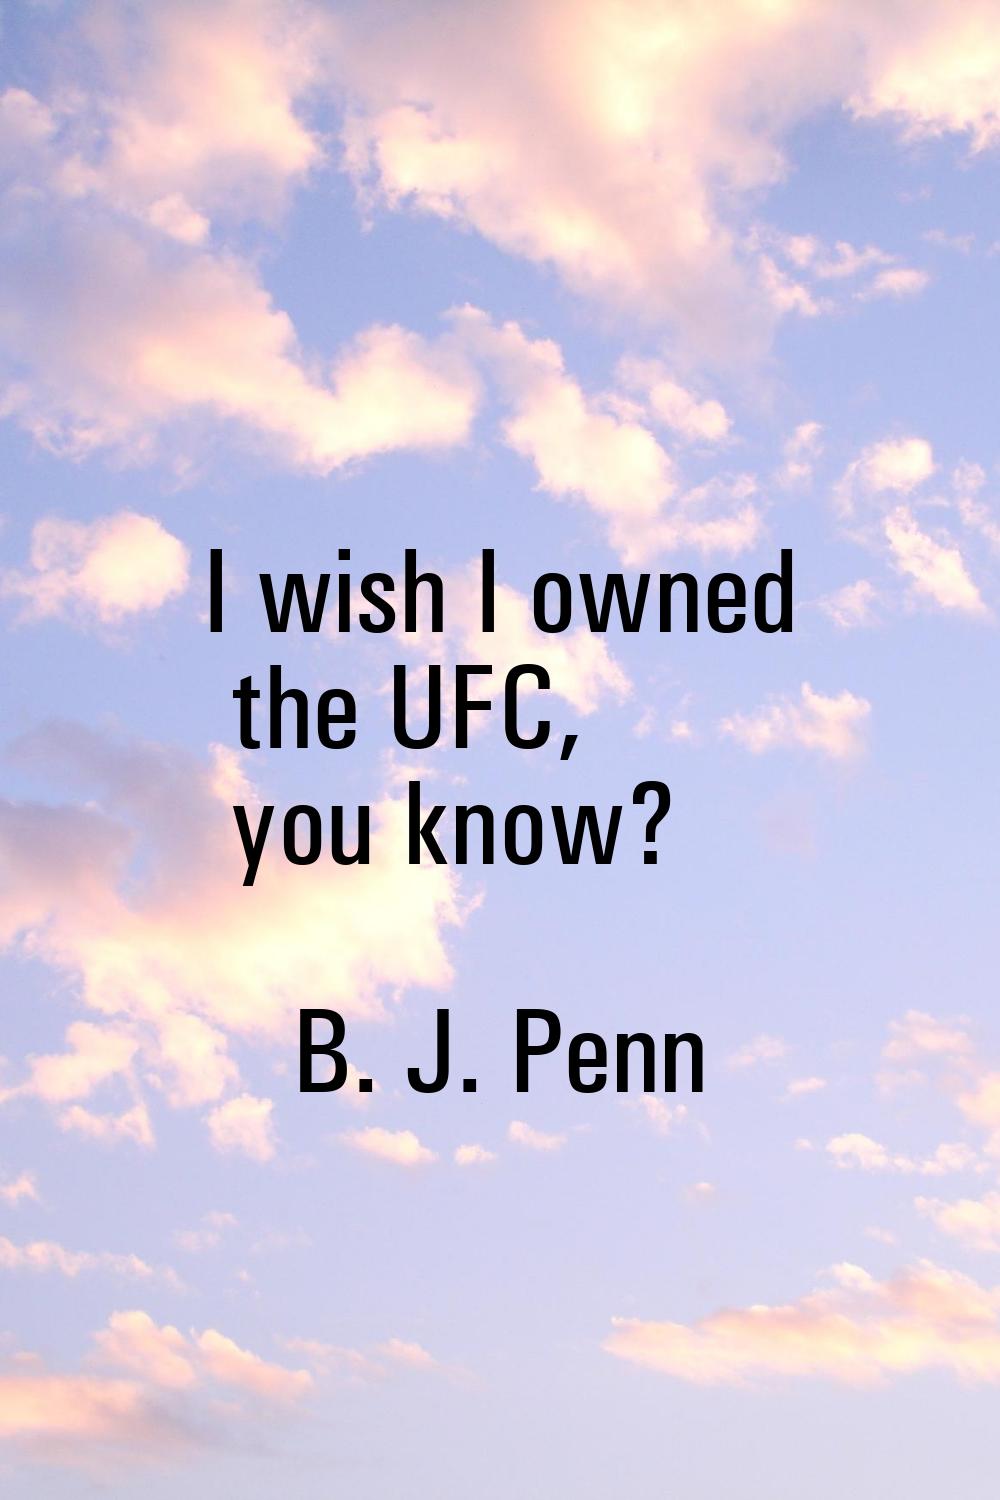 I wish I owned the UFC, you know?